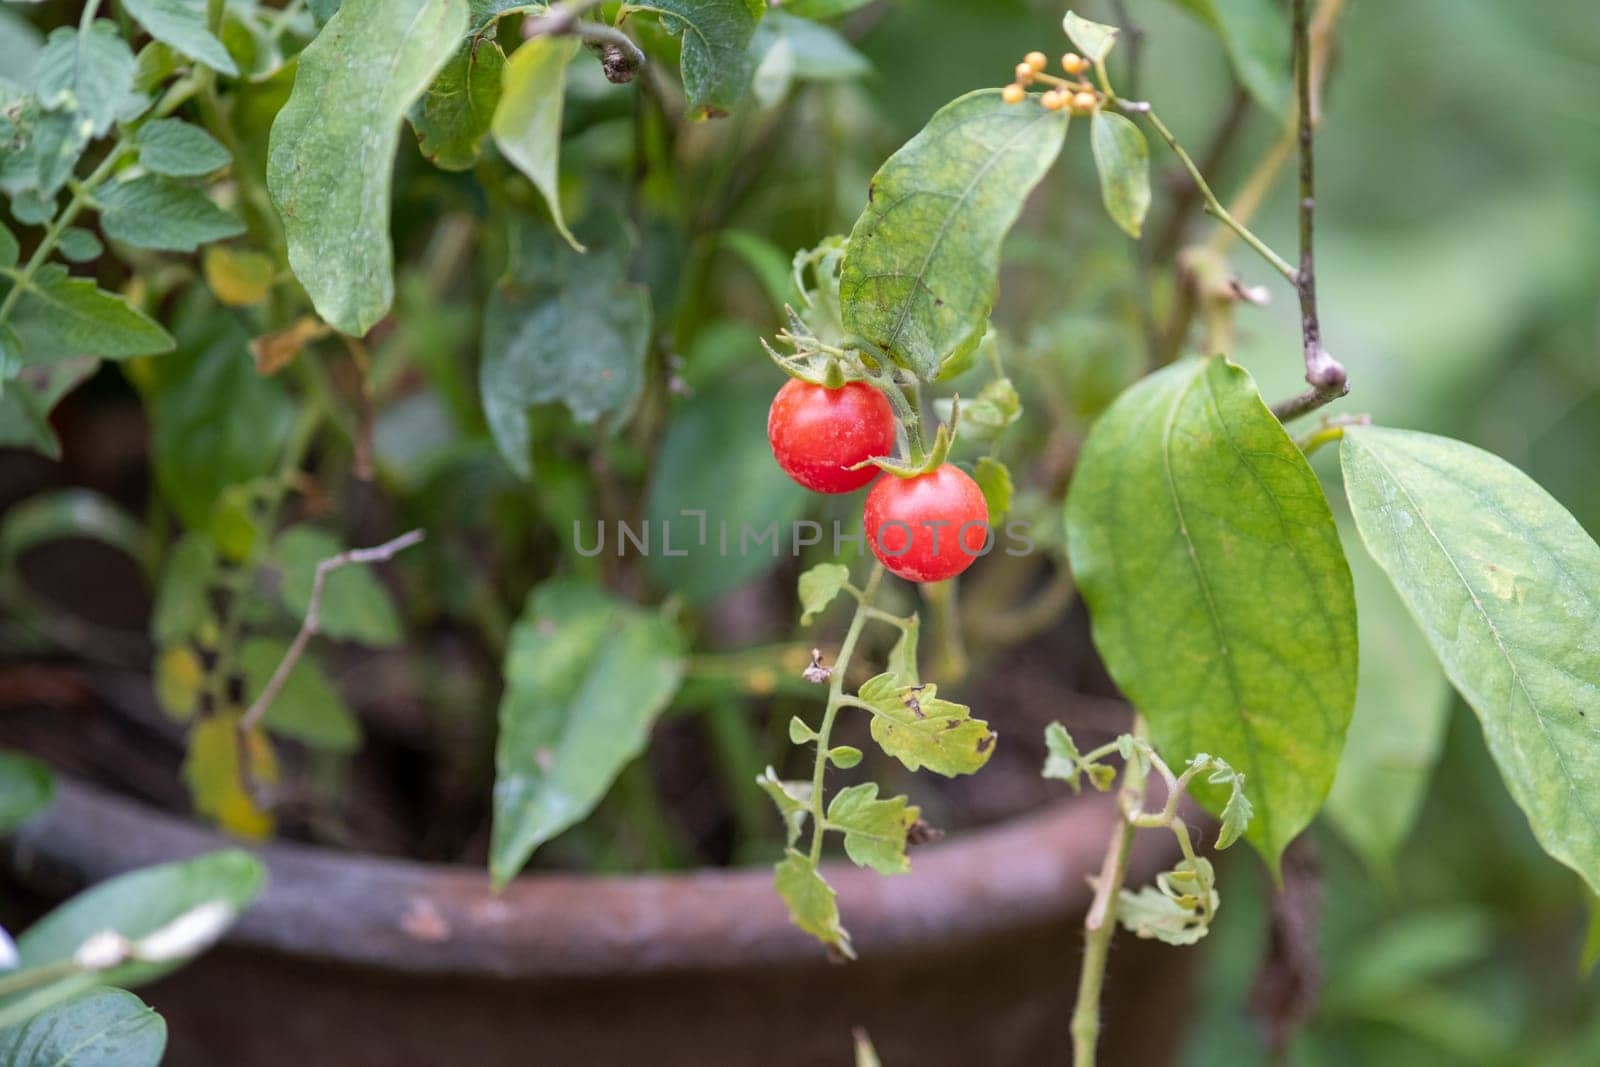 branch of fresh tiny tomatoes hanging on tree in garden, little tomato fruits in growth in garden forest tree by wuttichaicci